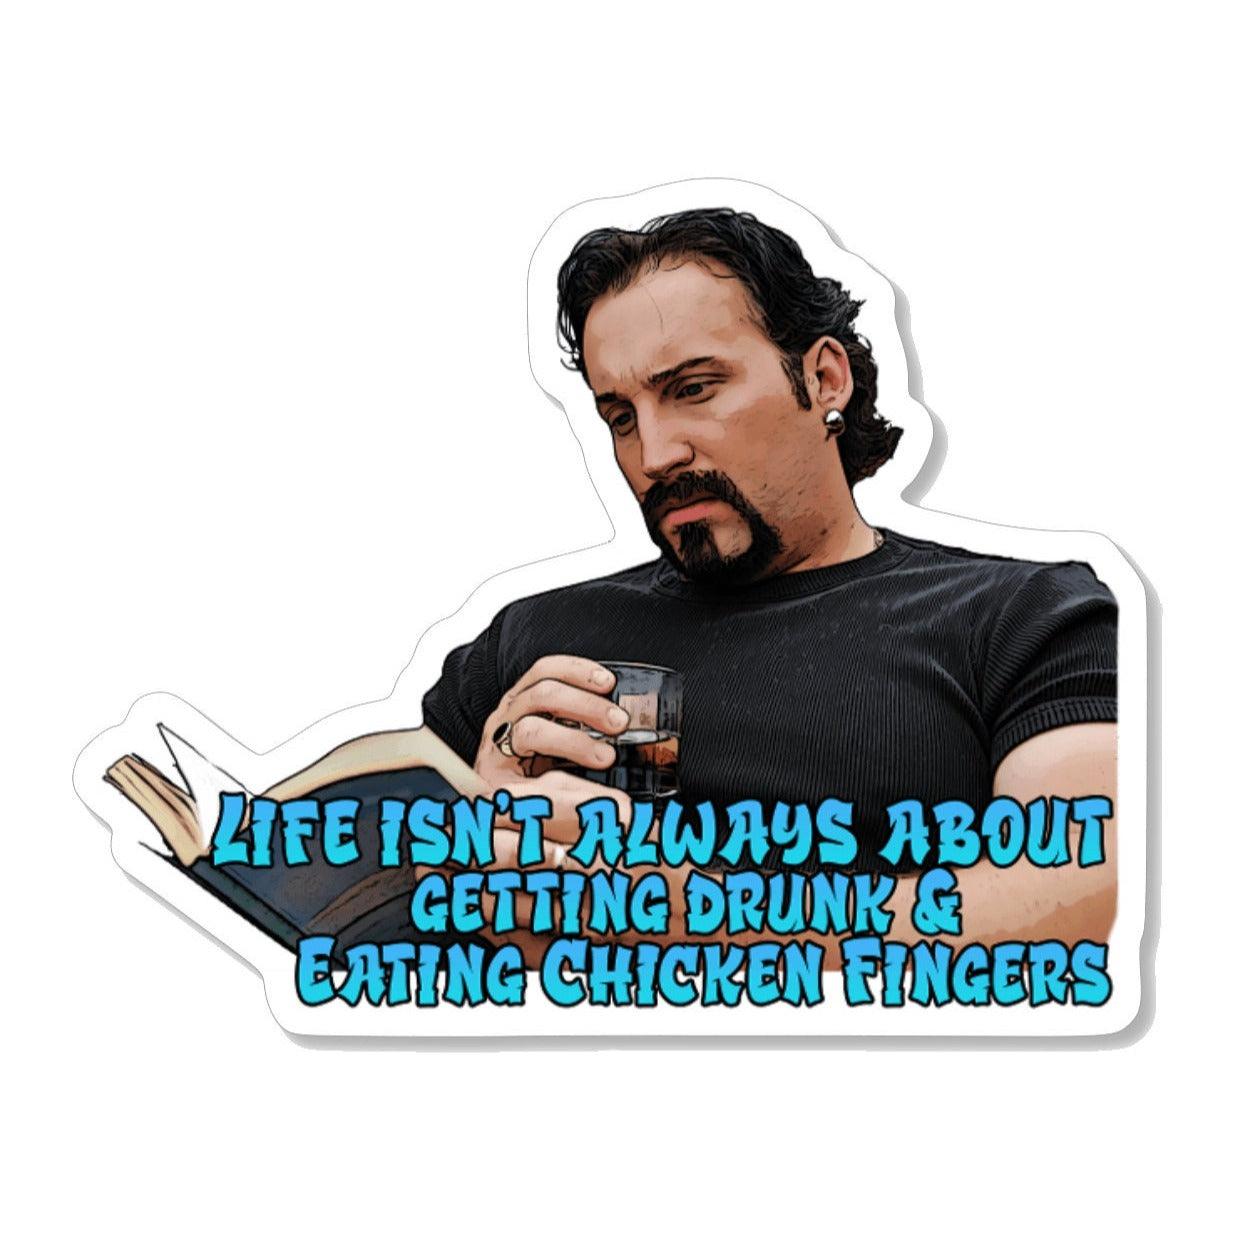 Trailer Park Boys Julian Sticker | Officially Licensed Trailer Park Boys Sticker | Julian Sticker Trailer Park Boys Merch | Stickers for Men - Ottos Grotto :: Stickers For Your Stuff